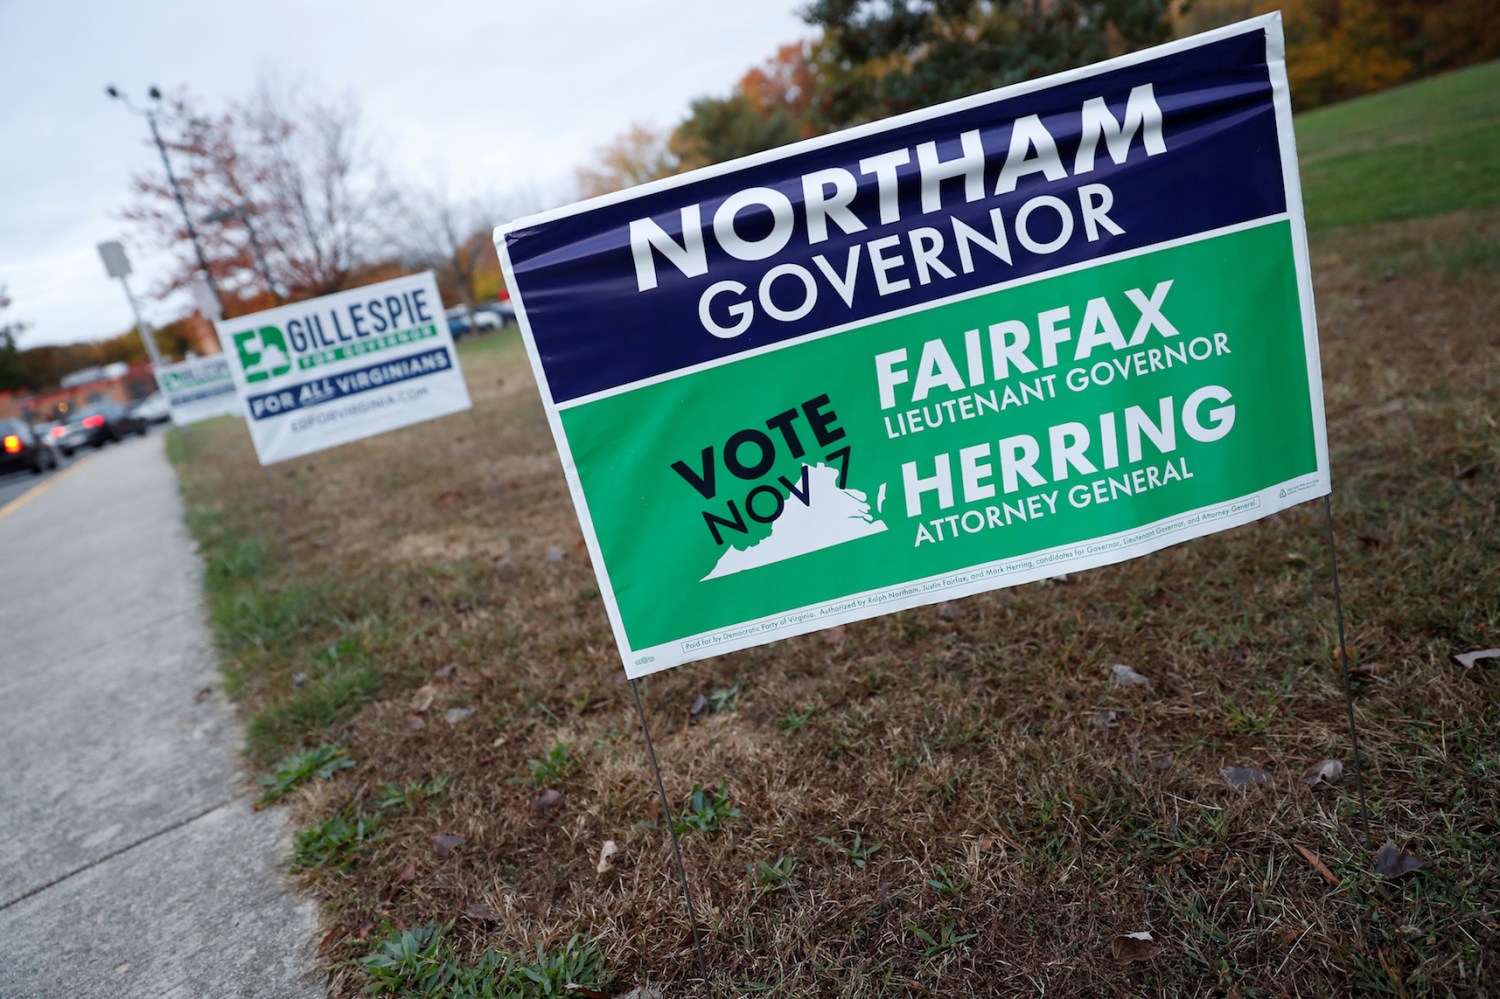 Campaign signs for Ed Gillespie and Ralph Northam are seen on Election Day at Washington Mill Elementary School in Alexandria, Virginia, U.S., November 7, 2017. REUTERS/Aaron P. Bernstein - RC15716CB9C0